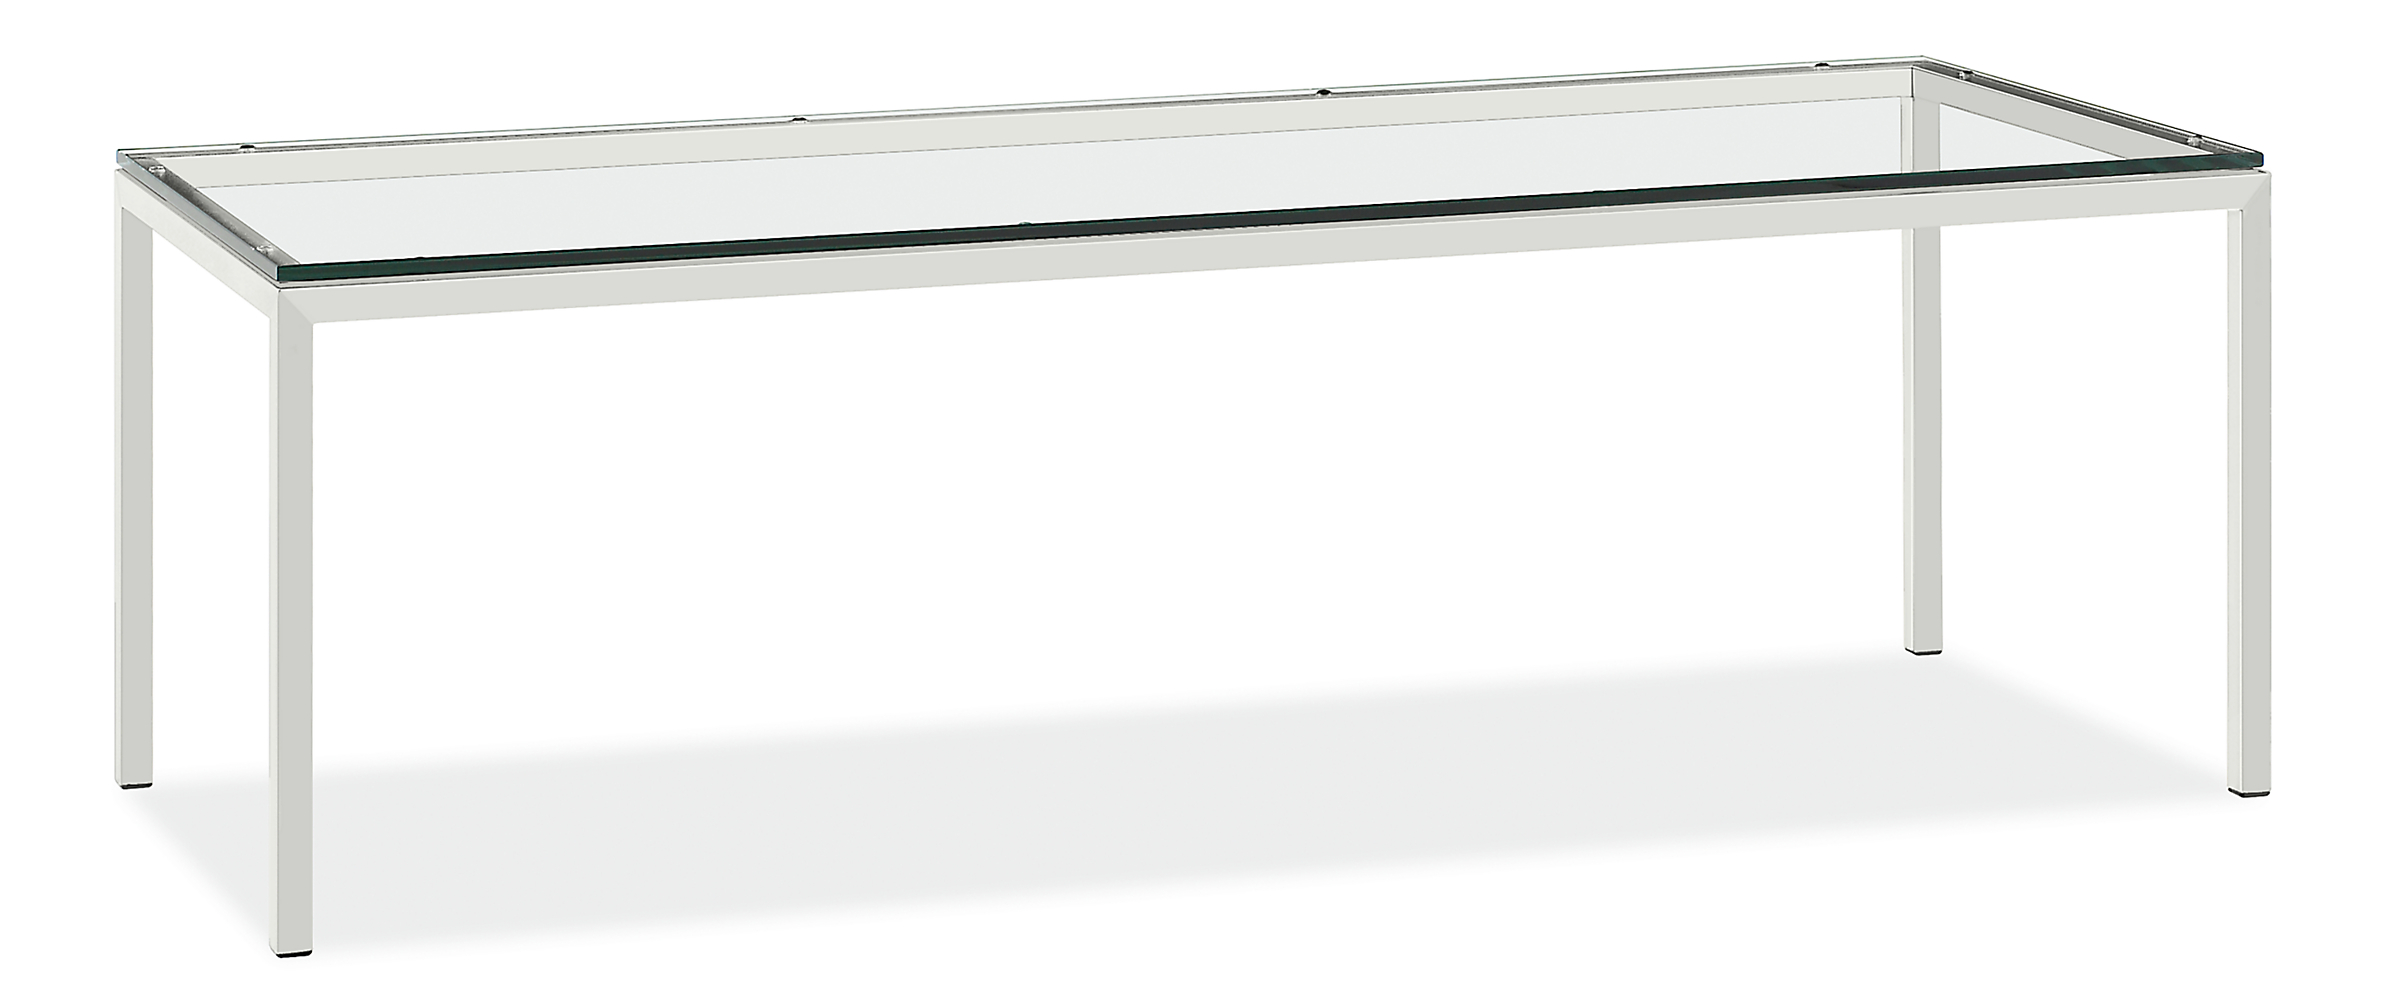 Parsons 92w 30d 40h Counter Table in 1.5" White Base w/Tempered Clear Glass